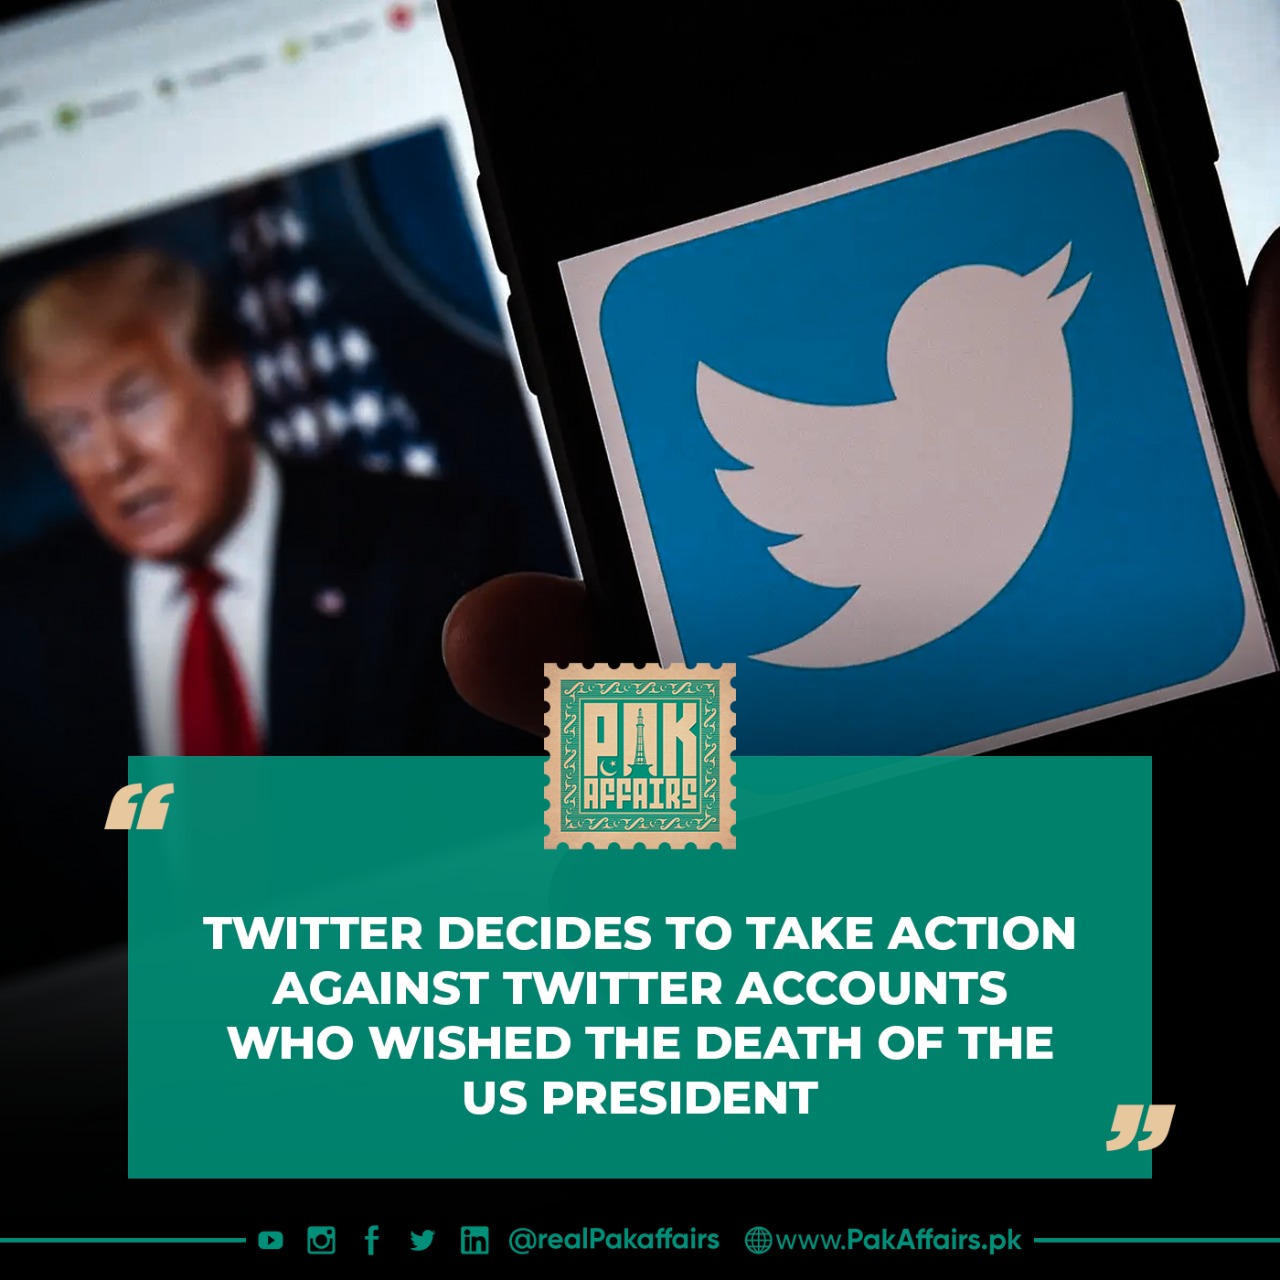 Twitter decides to take action against Twitter accounts who wished the death of the US president